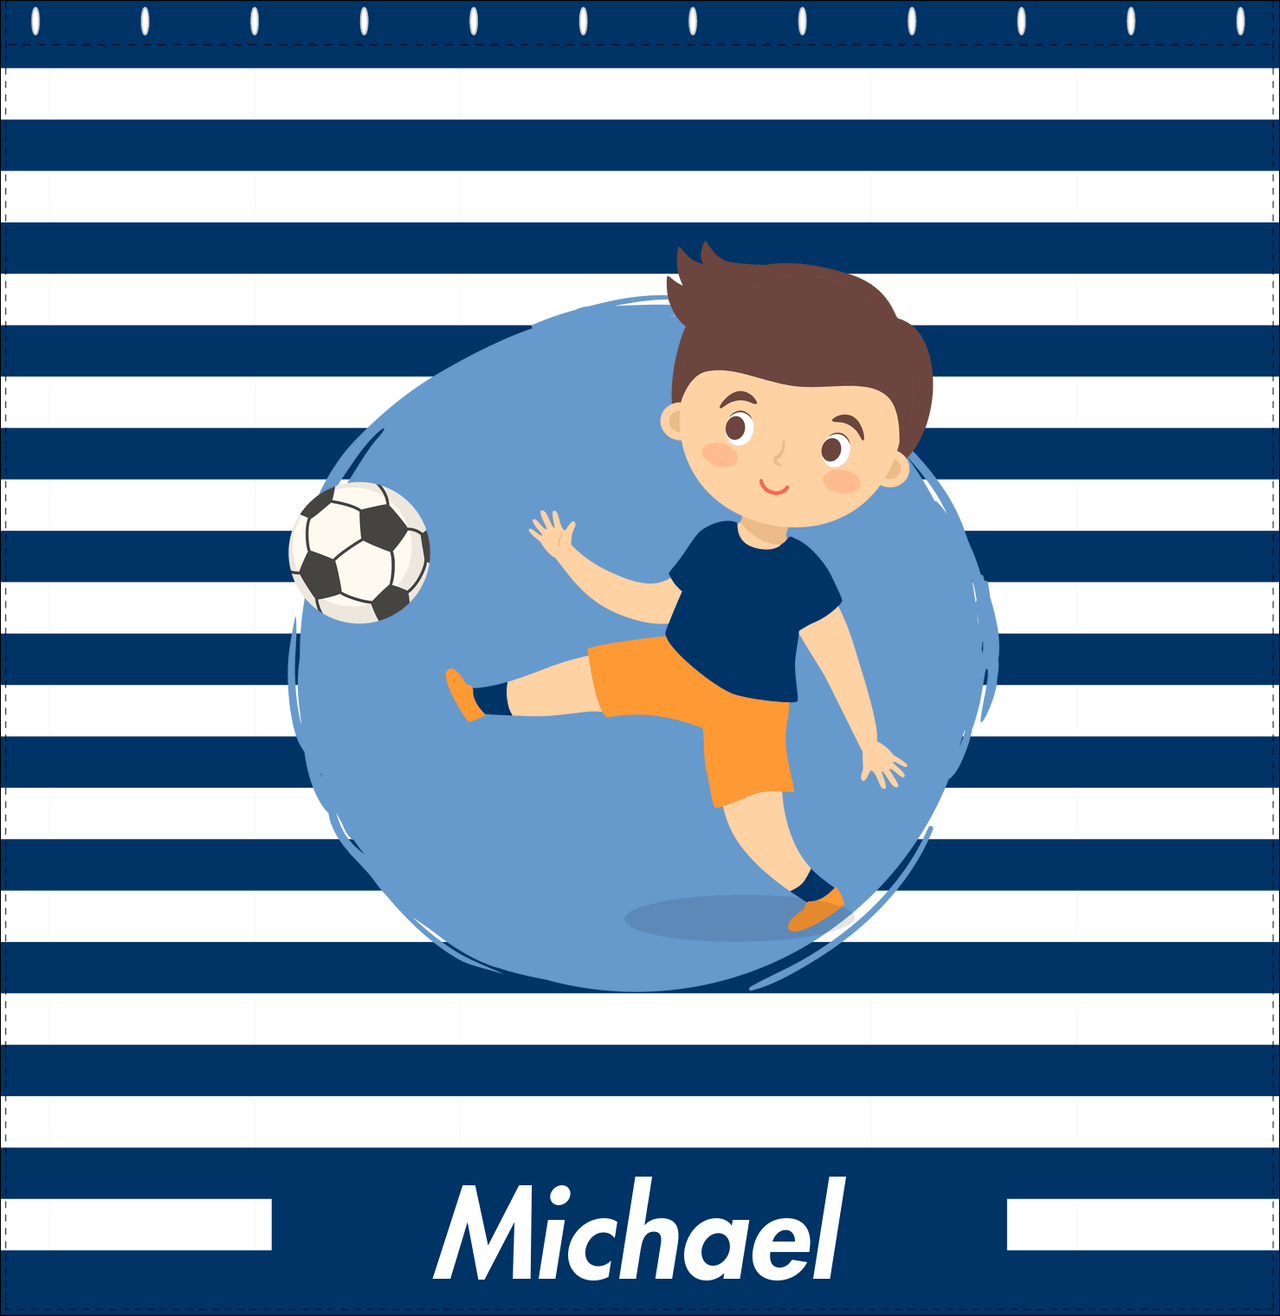 Personalized Soccer Shower Curtain XXIV - Blue Background - Brown Hair Boy II - Decorate View